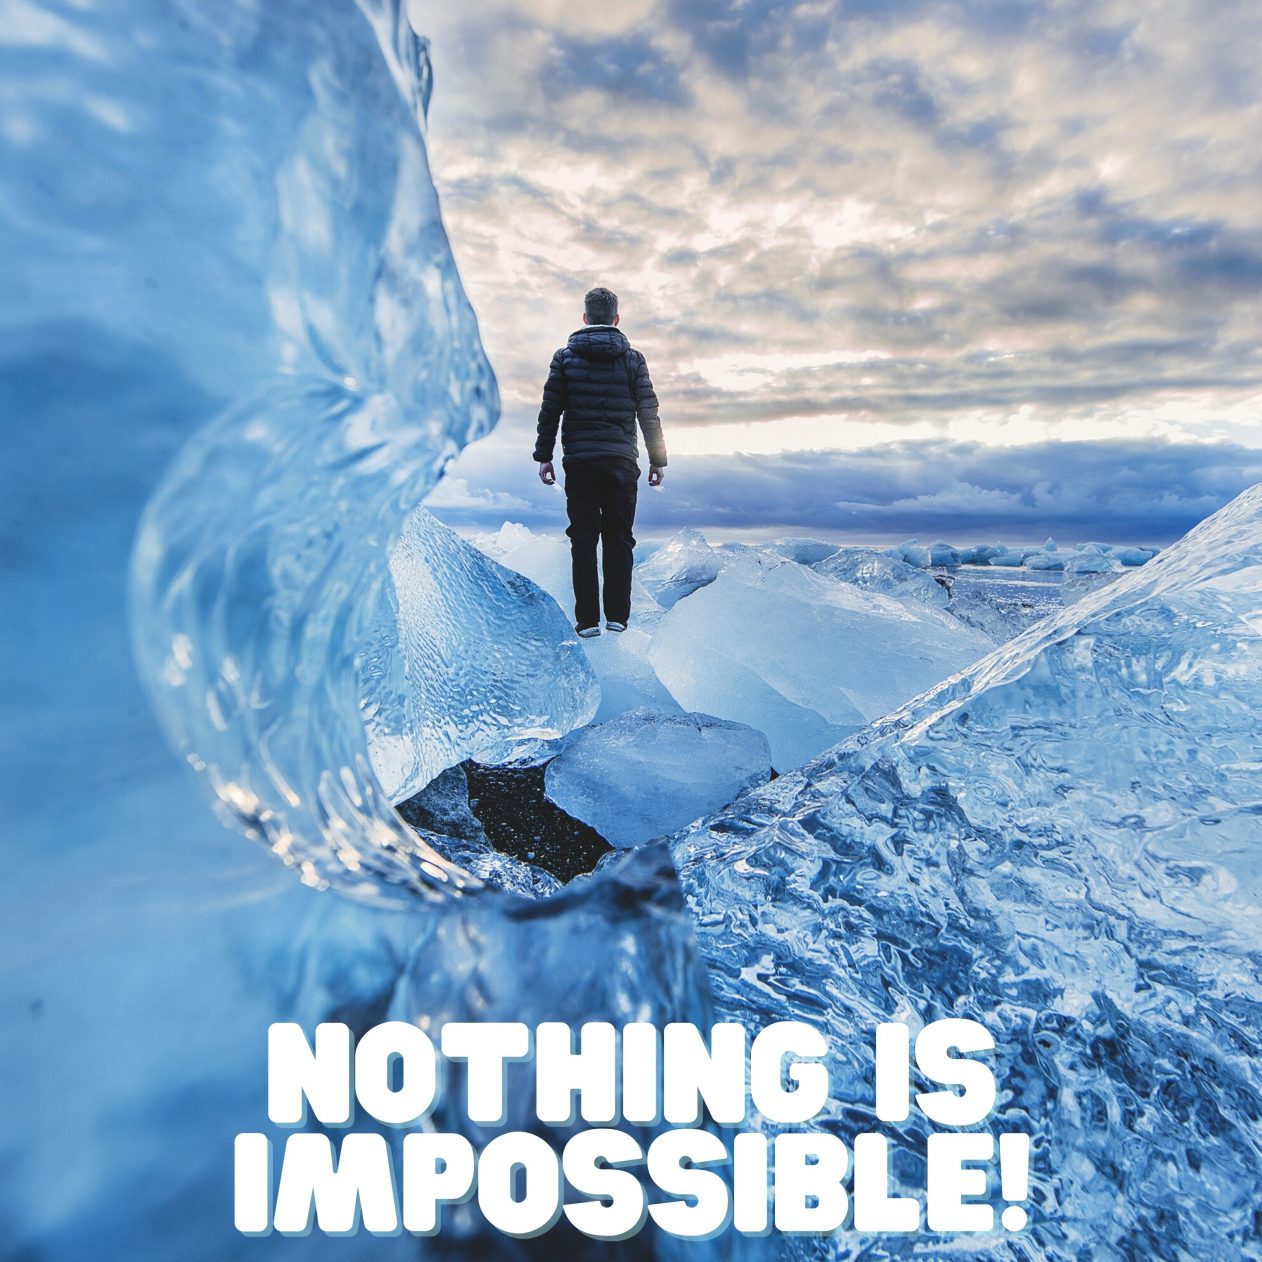 1262x1262 Parallax wallpaper 4k Nothing Is Impossible Quote iPad Wallpaper 1262x1262 pixels resolution